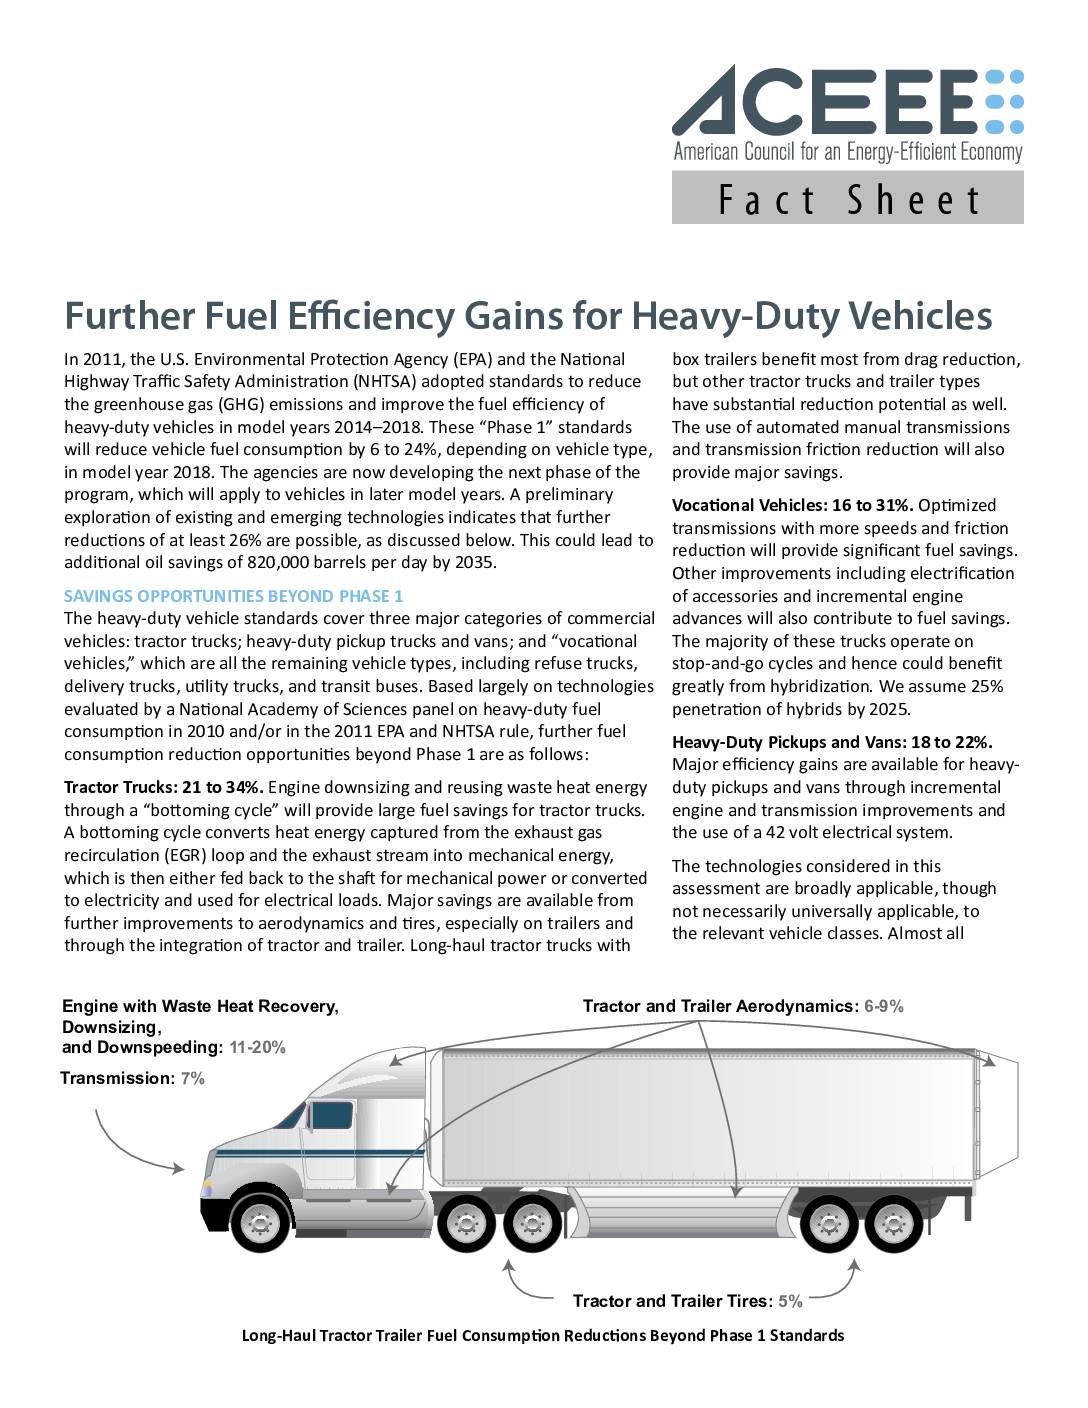 Further Fuel Efficiency Gains for Heavy-Duty Vehicles